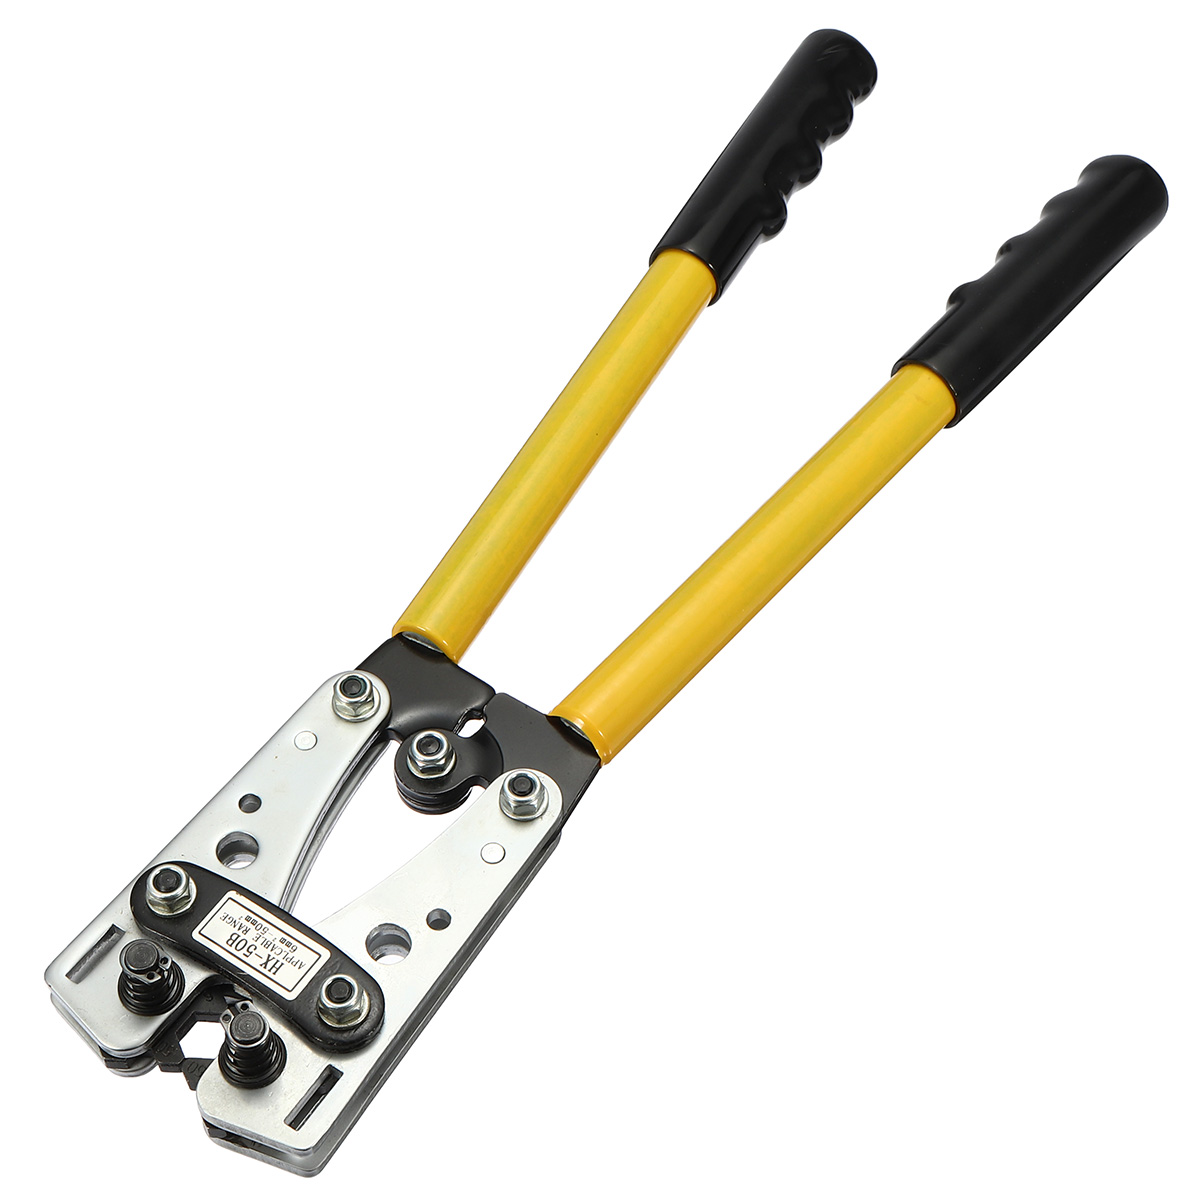 6-50-mm-Crimp-Tube-Terminal-Crimper-Plier-Tool-Battery-Cable-Lugs-Hex-Crimping-Tool-Cable-Terminal-P-1549269-8